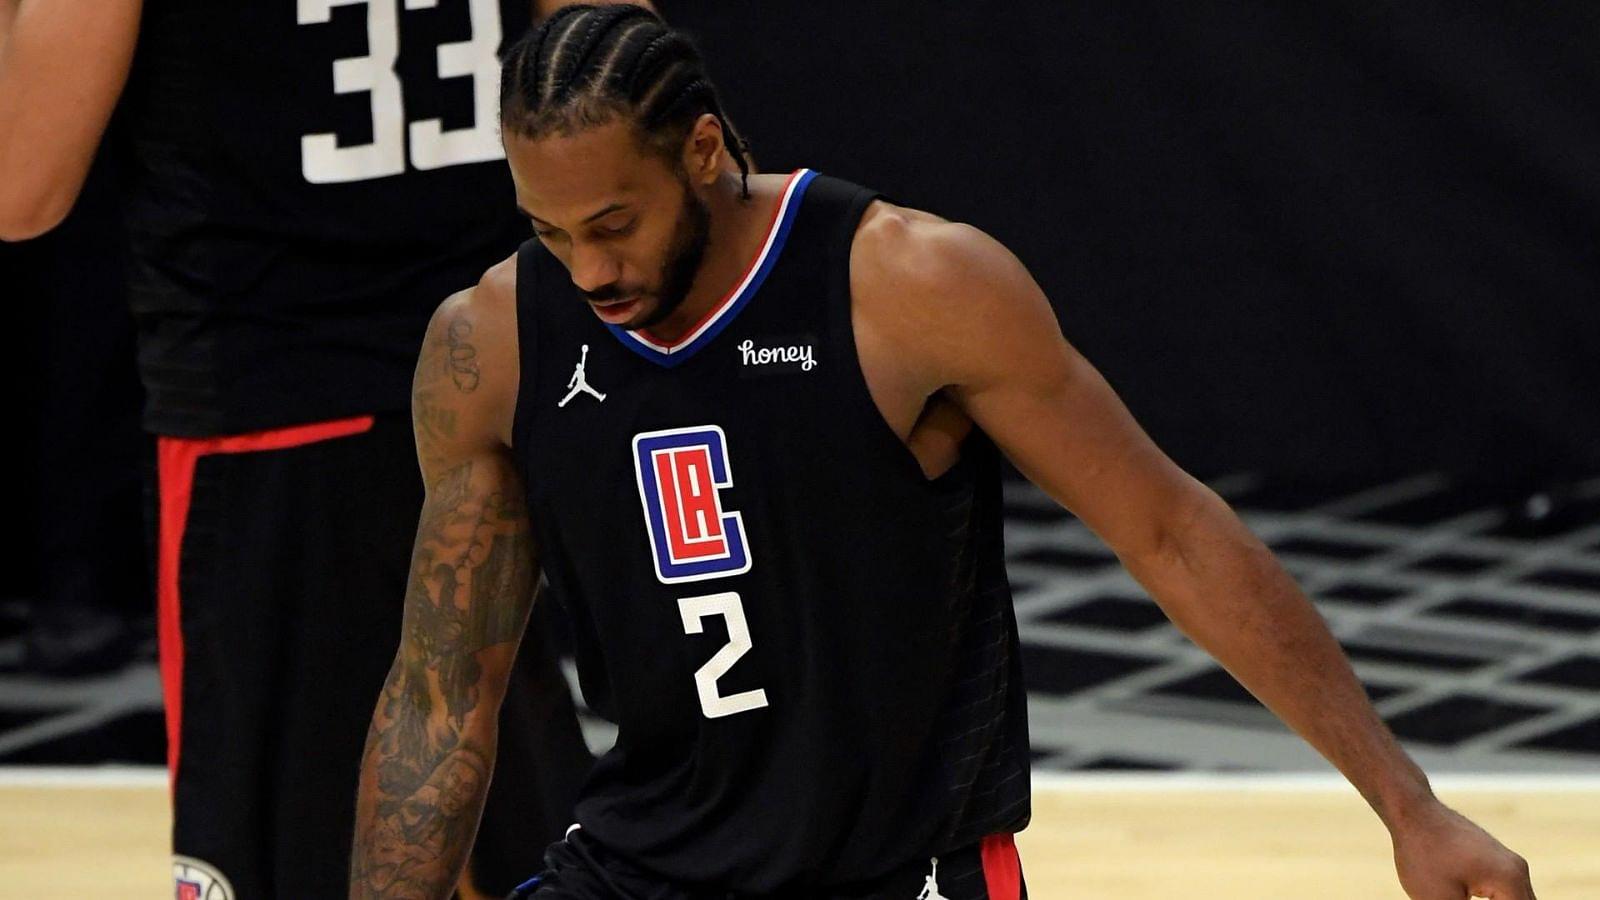 "If Kawhi Leonard is healthy this team is special, but how many games is it gonna be?": Veteran ESPN reporter asks an apt question regarding The Terminator's fitness